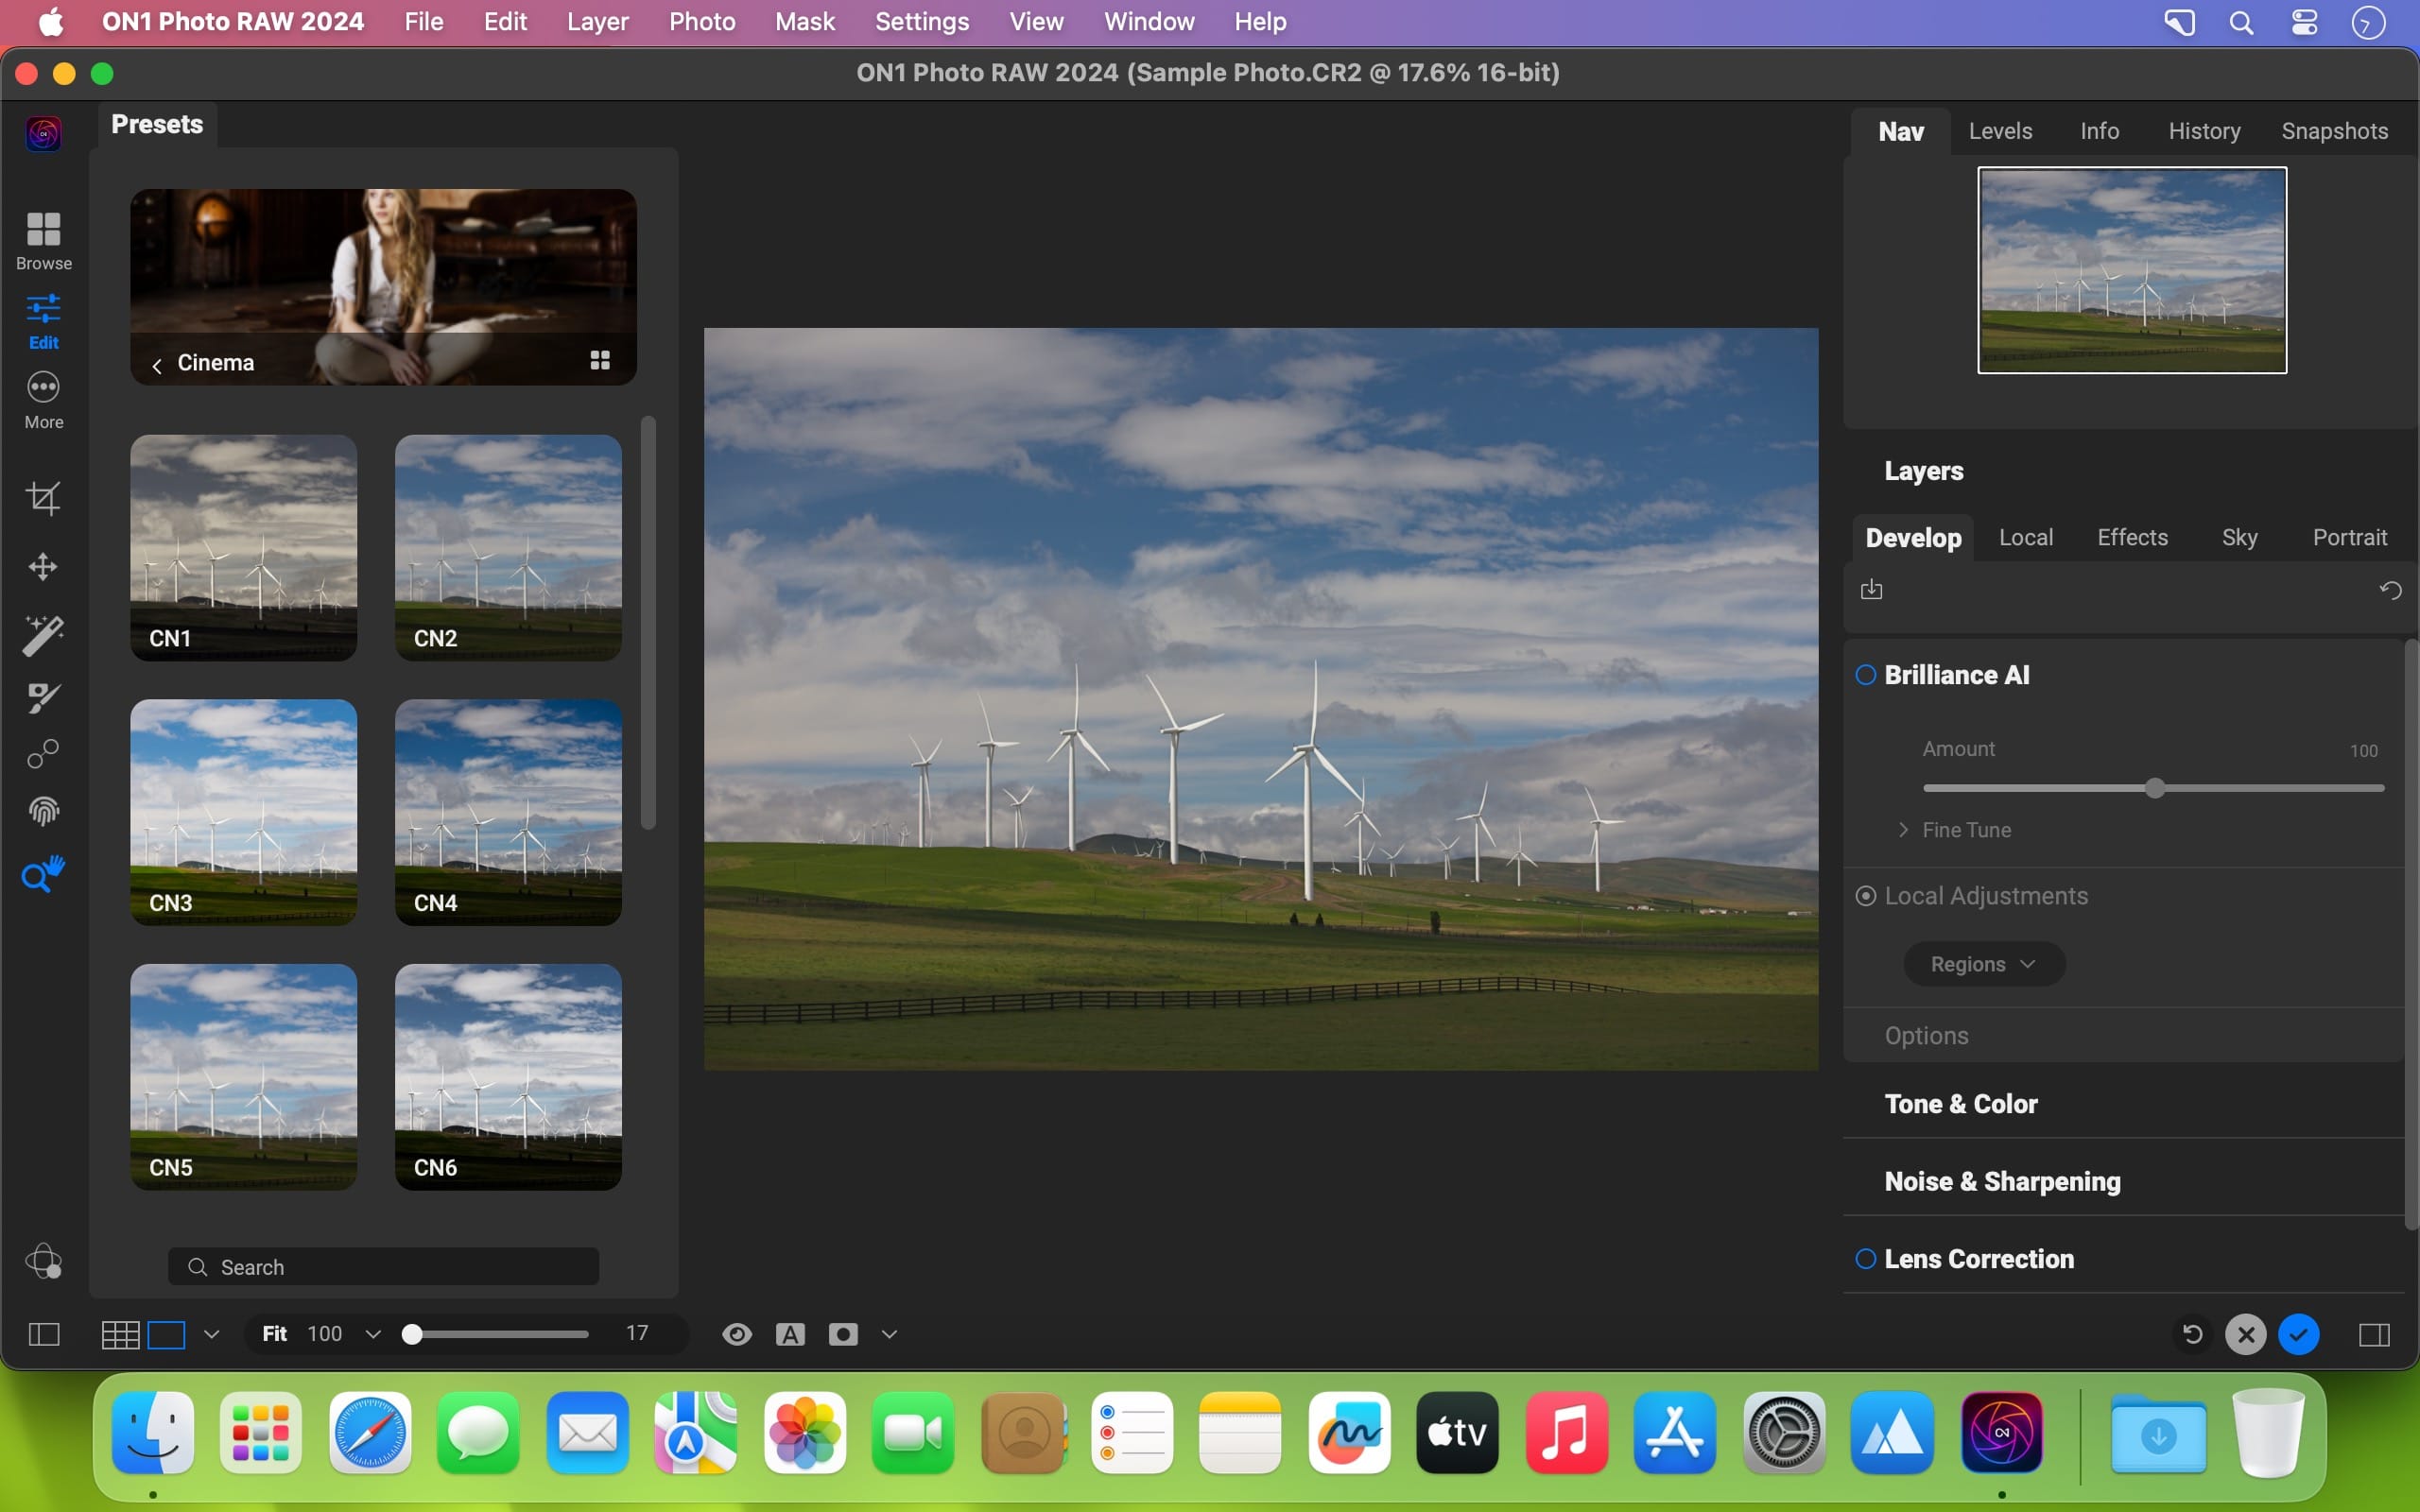 download the last version for iphoneON1 Photo RAW 2024 v18.0.3.14689